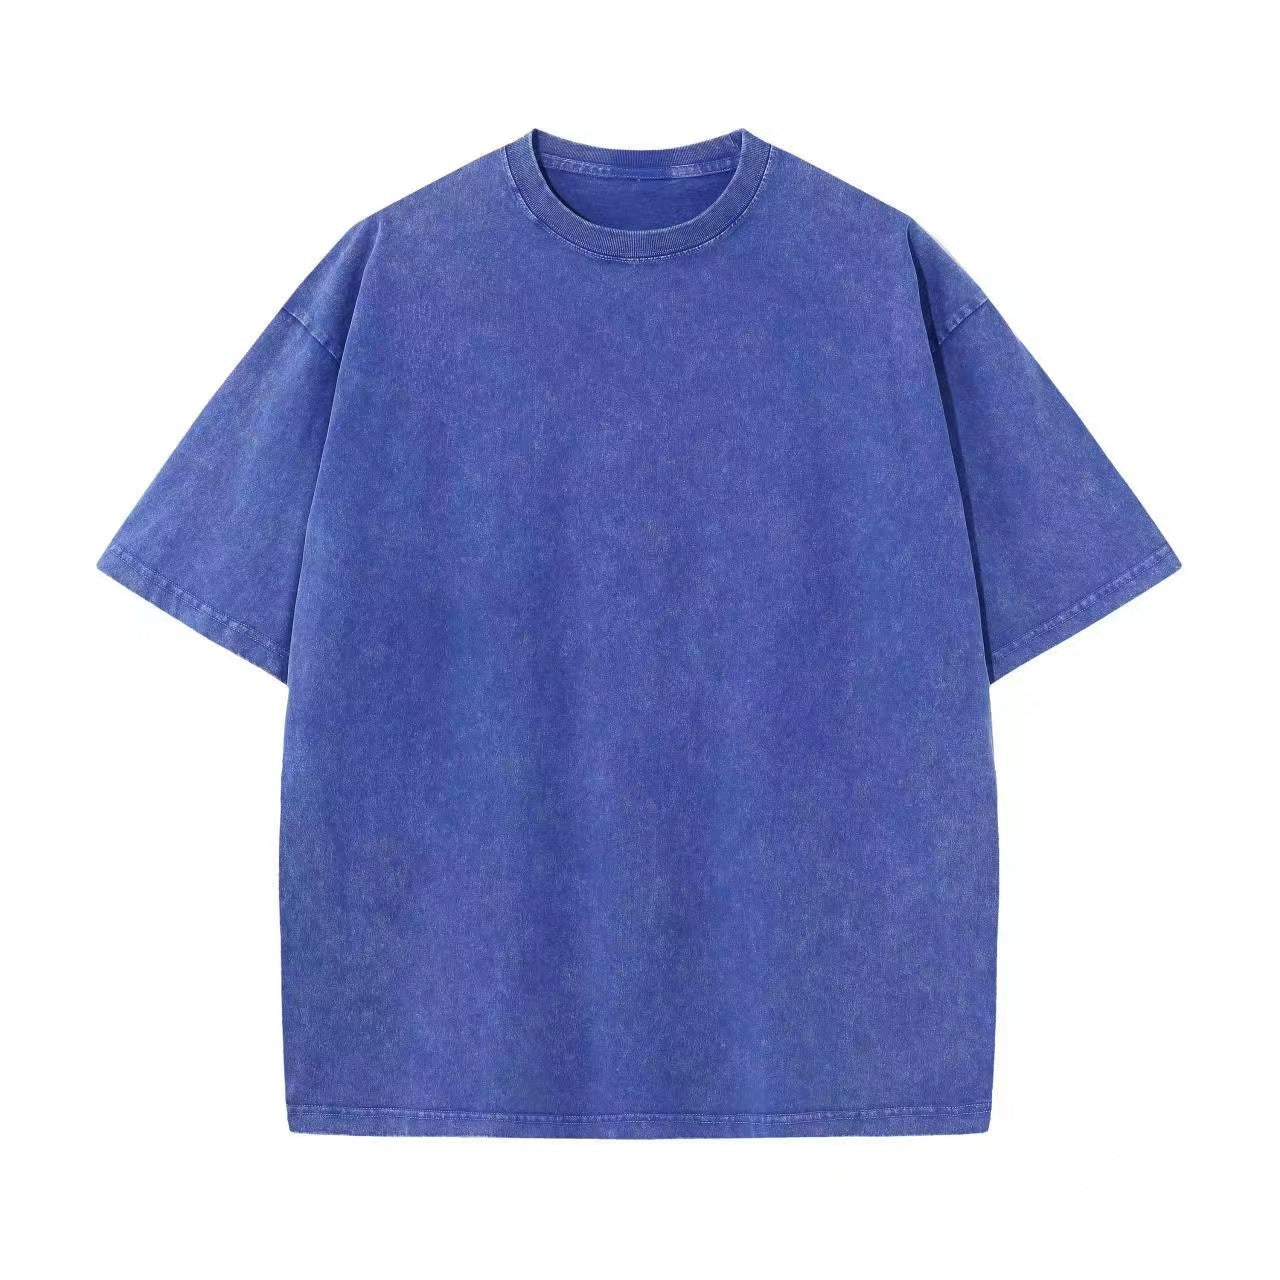 Heavy Loose Fit Washed T-Shirt - 230GSM